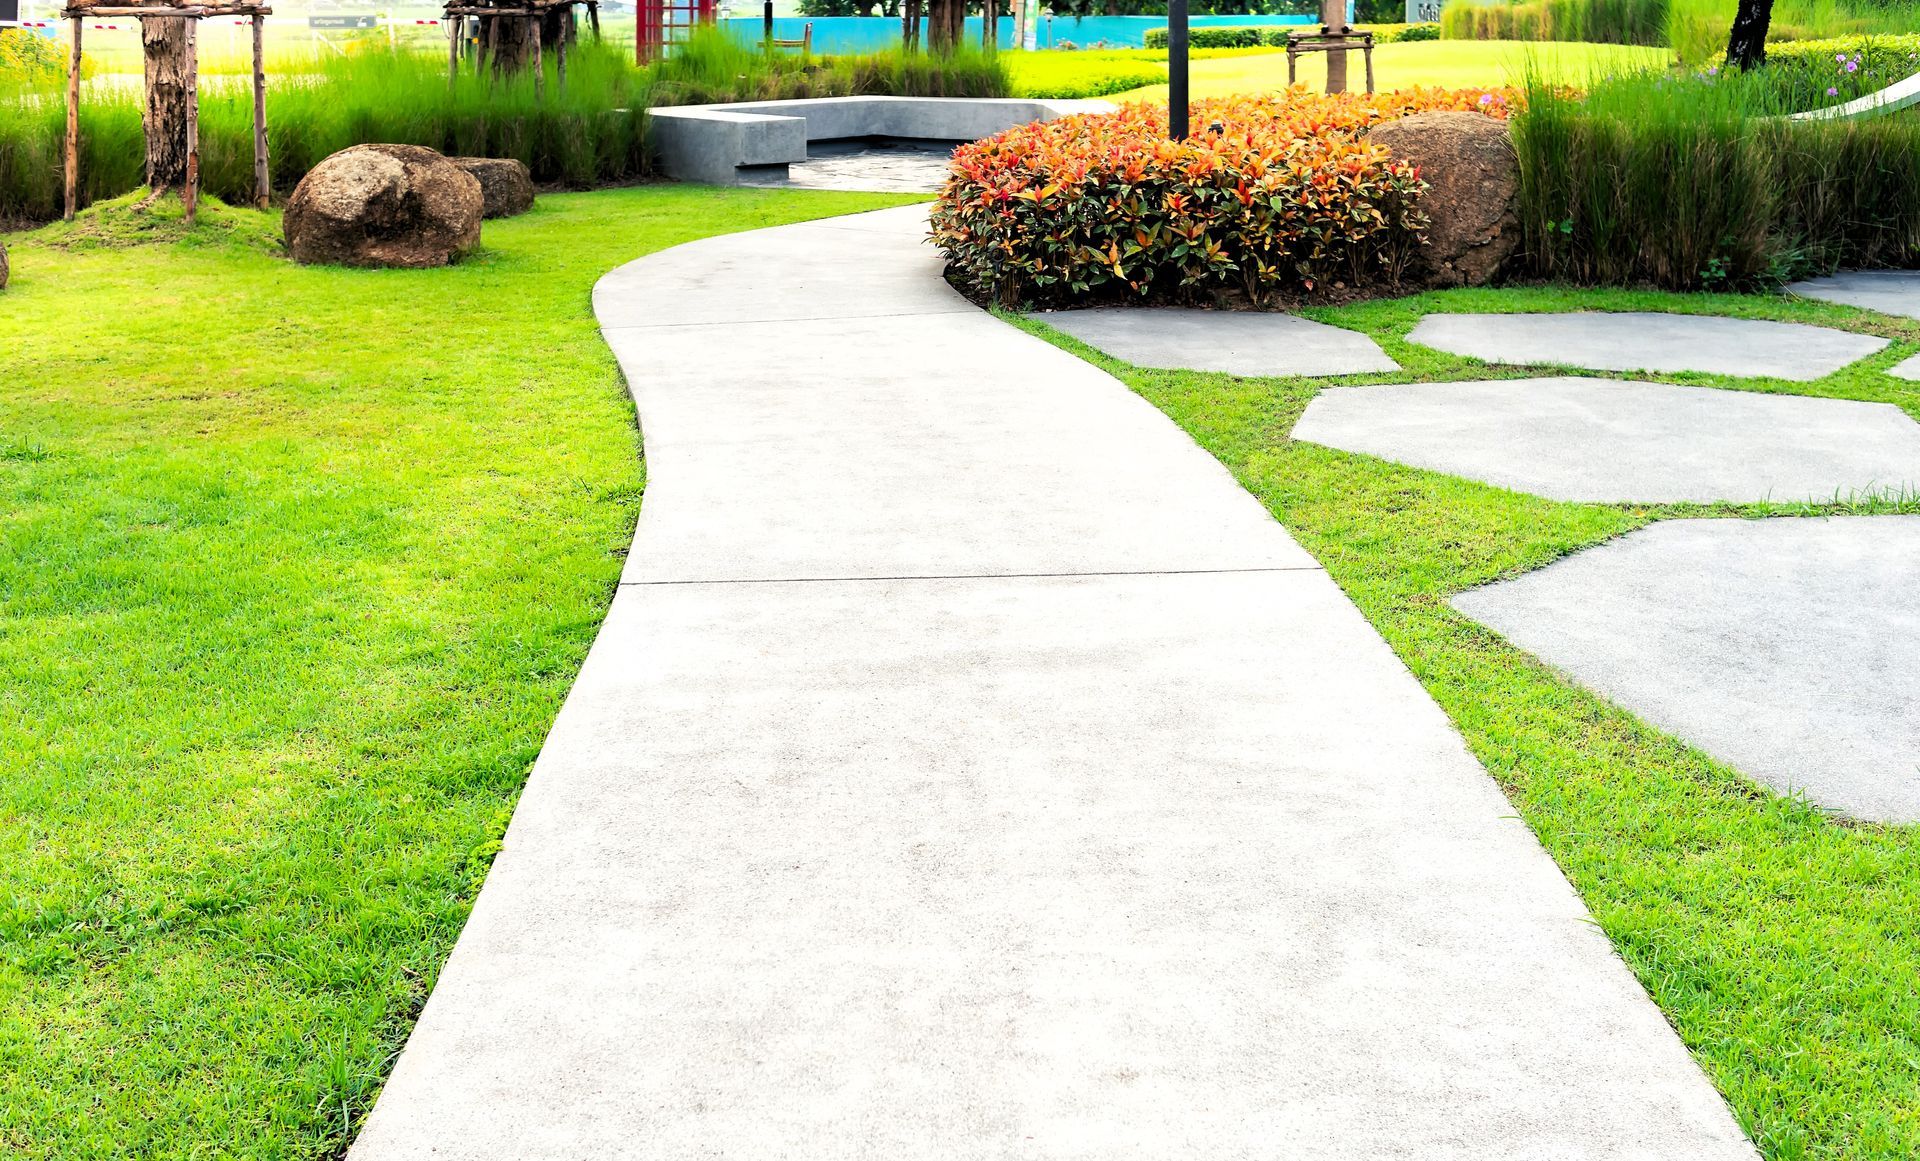 Concrete walkway surrounded by lush greenery and bushes in the garden